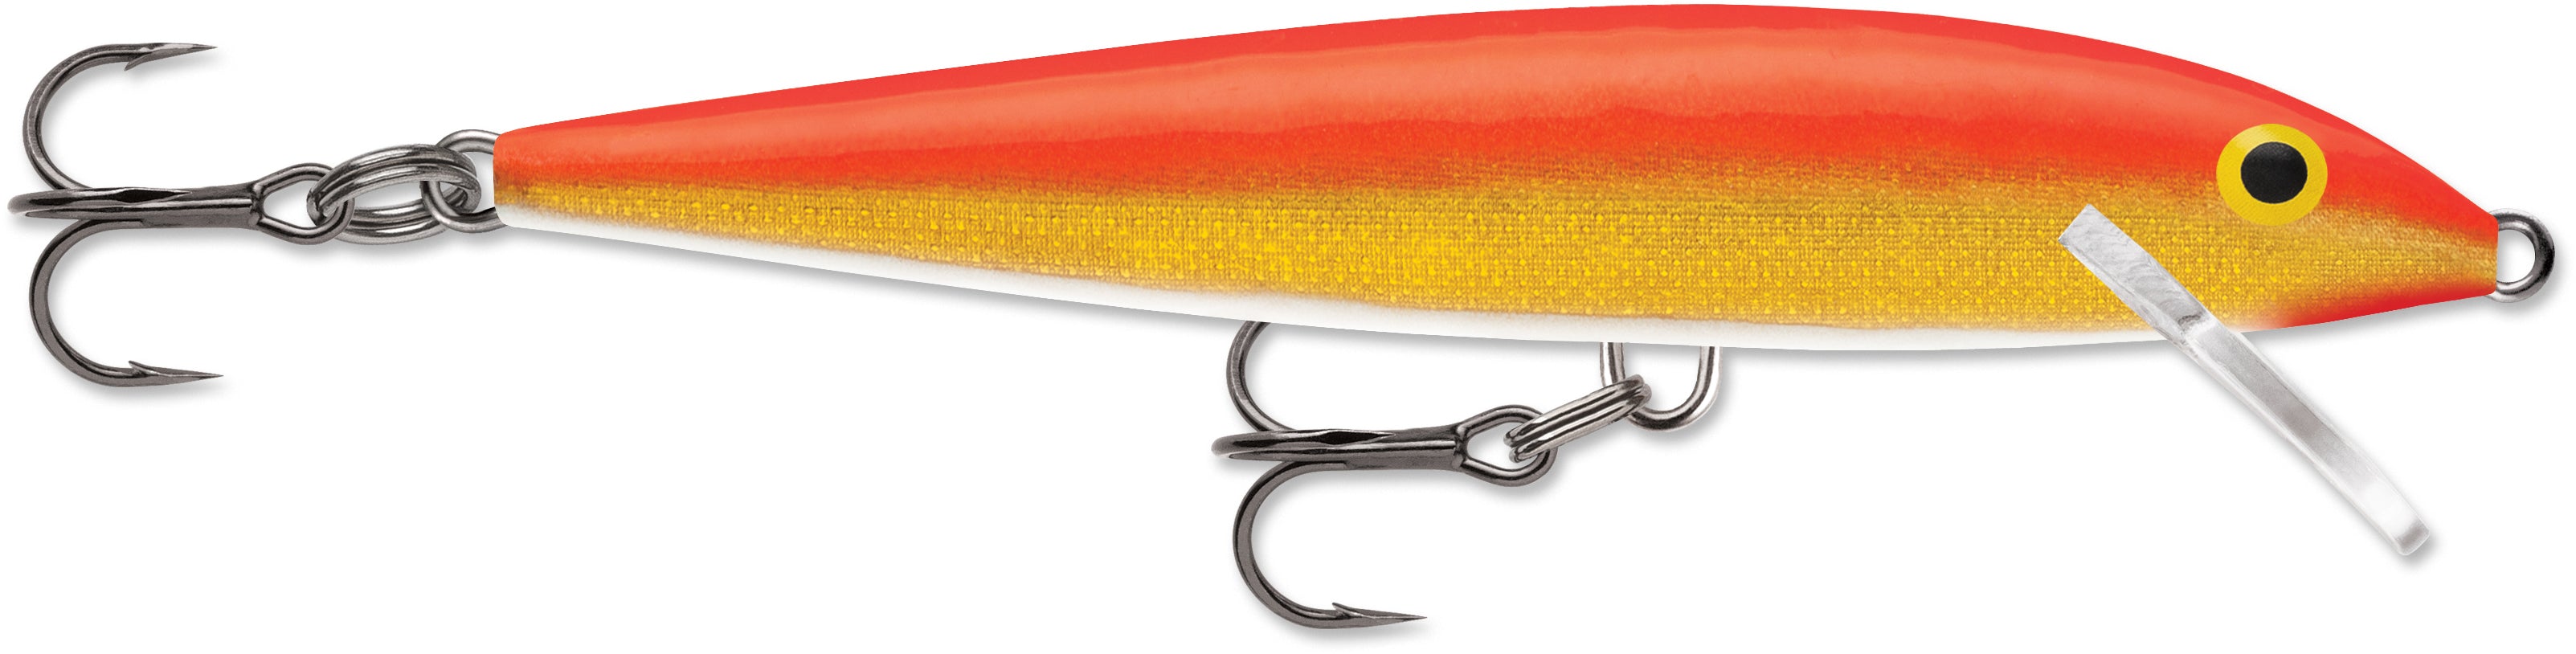 Finesse MK21 Shallow Diving Lure, 130mm, 15gm, Gold Flash